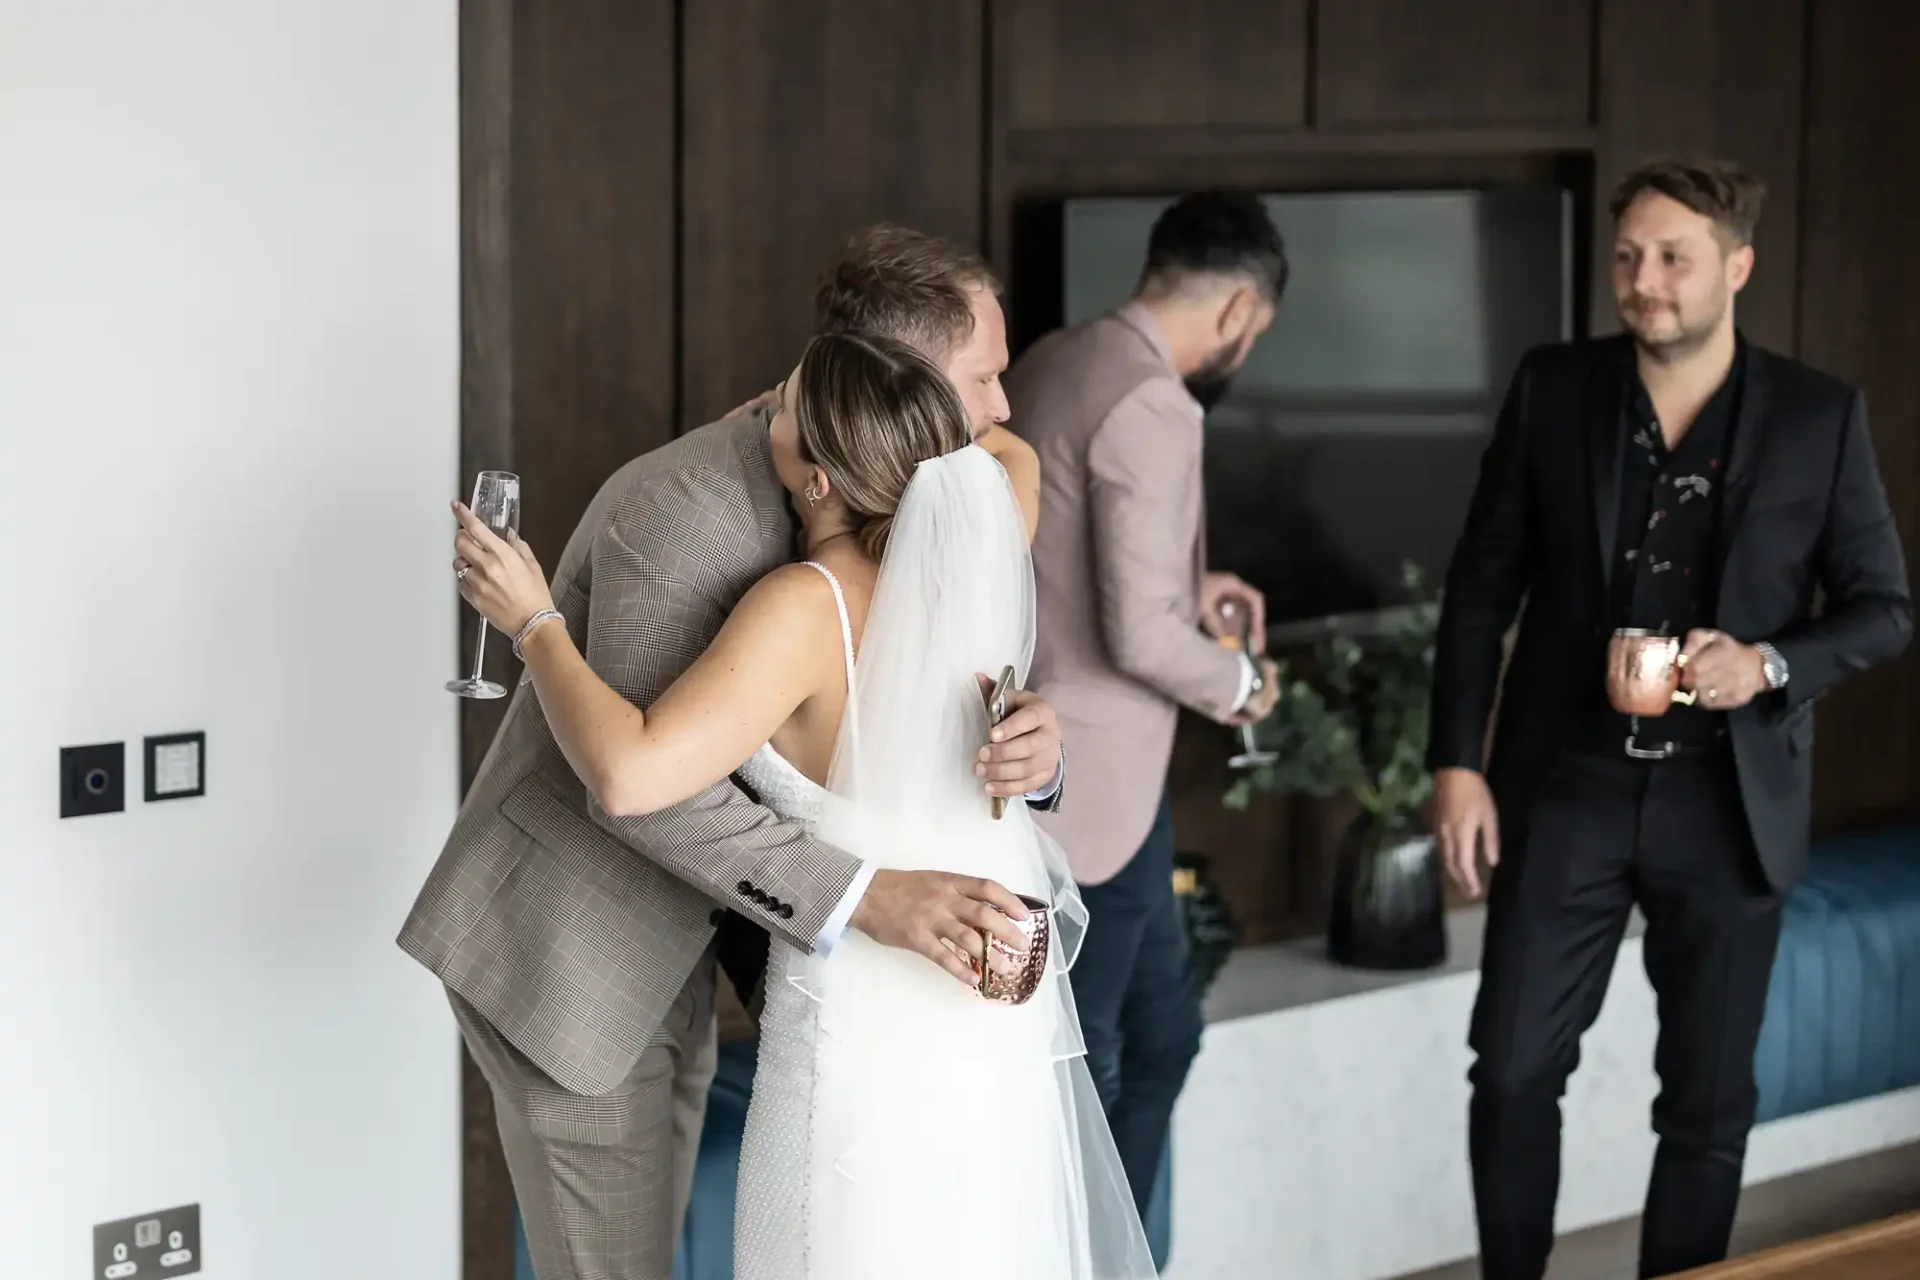 A bride hugs a guest at a wedding reception, holding a champagne glass, as two other guests converse in the background.